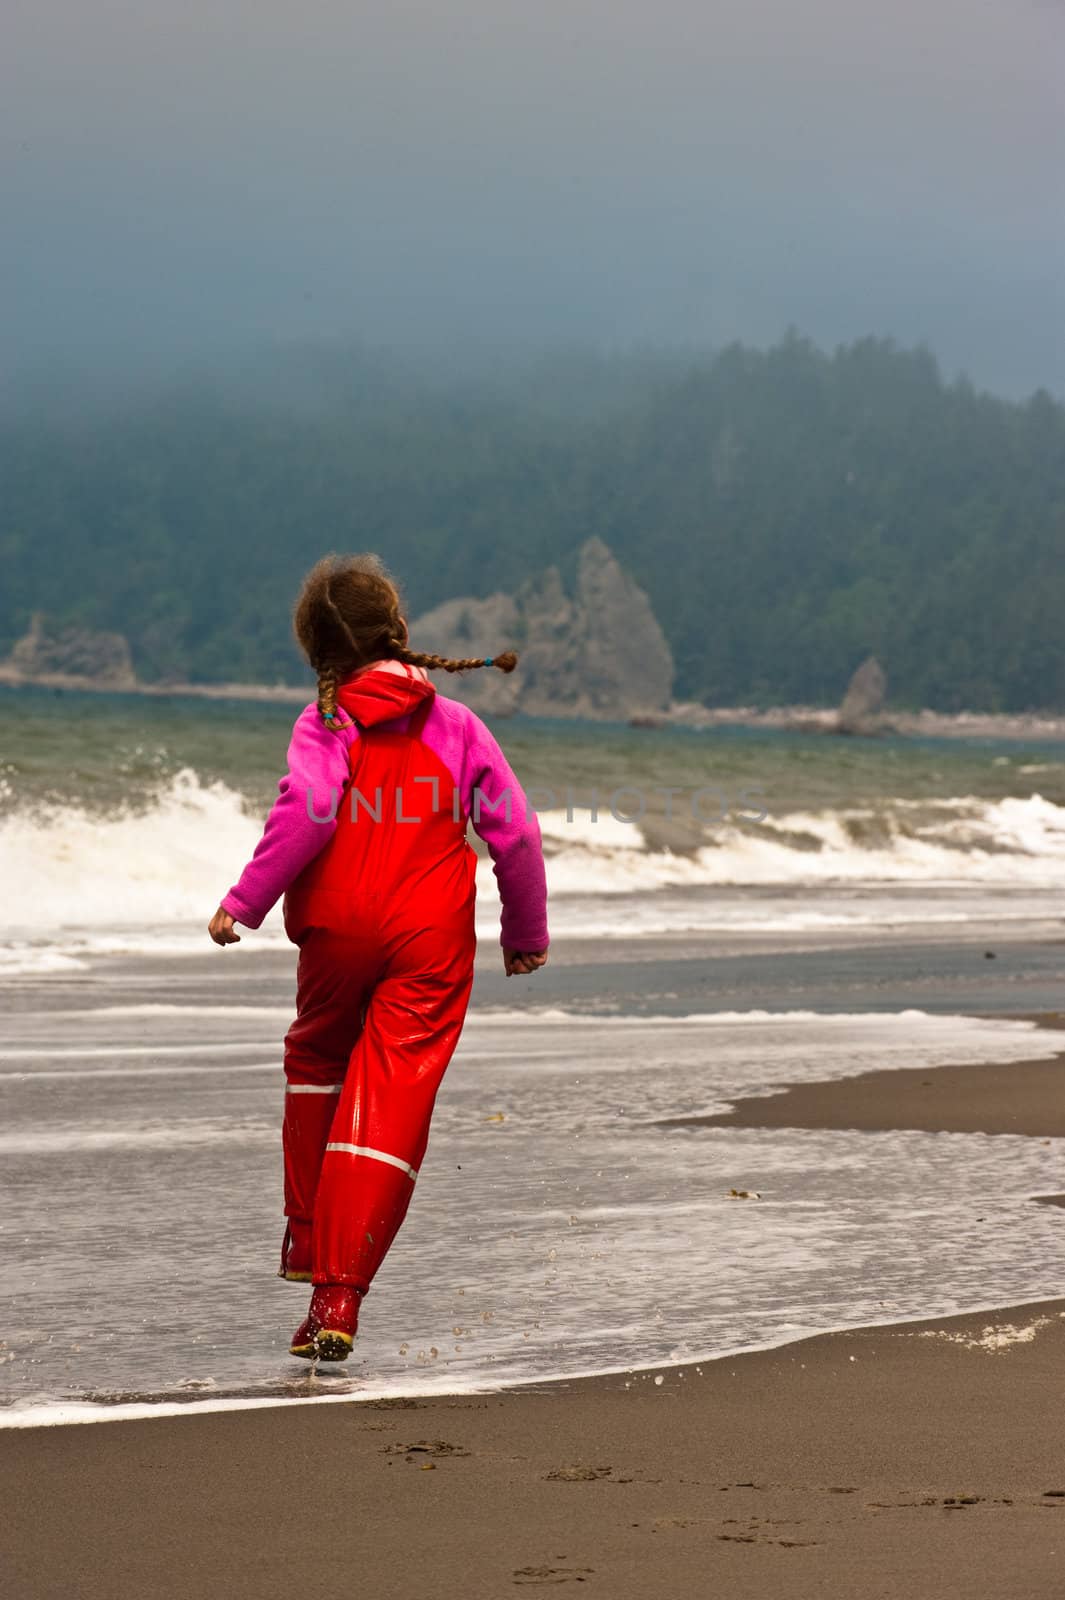 young girl in red rain clothes skipping down beach